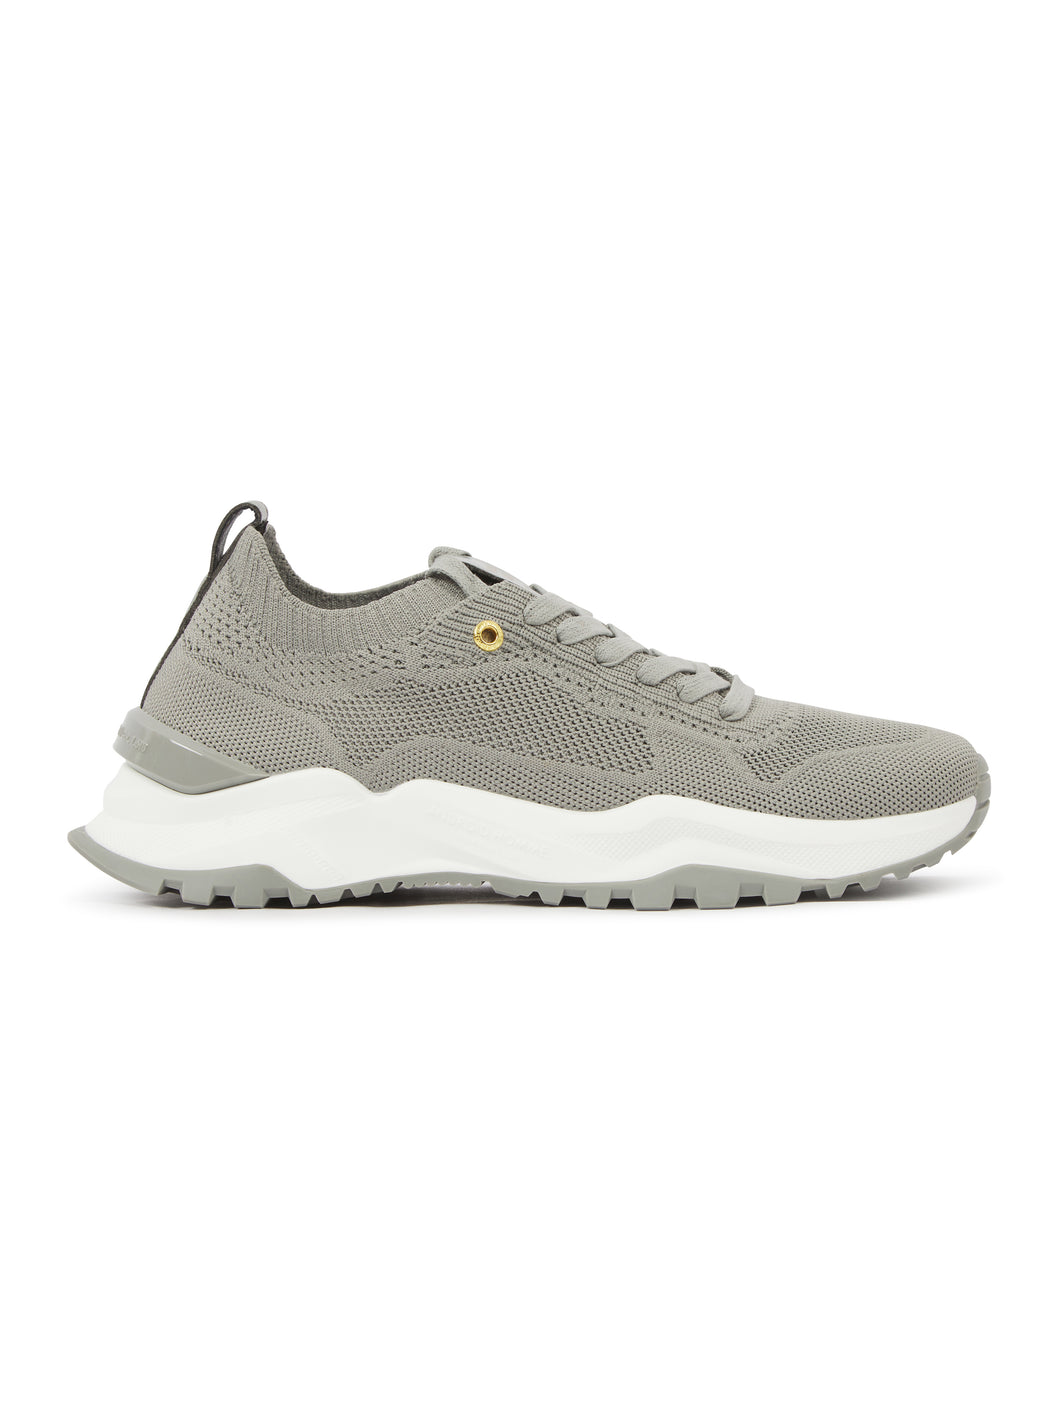 Android Homme Leo Carillo Grey Knit Trainer